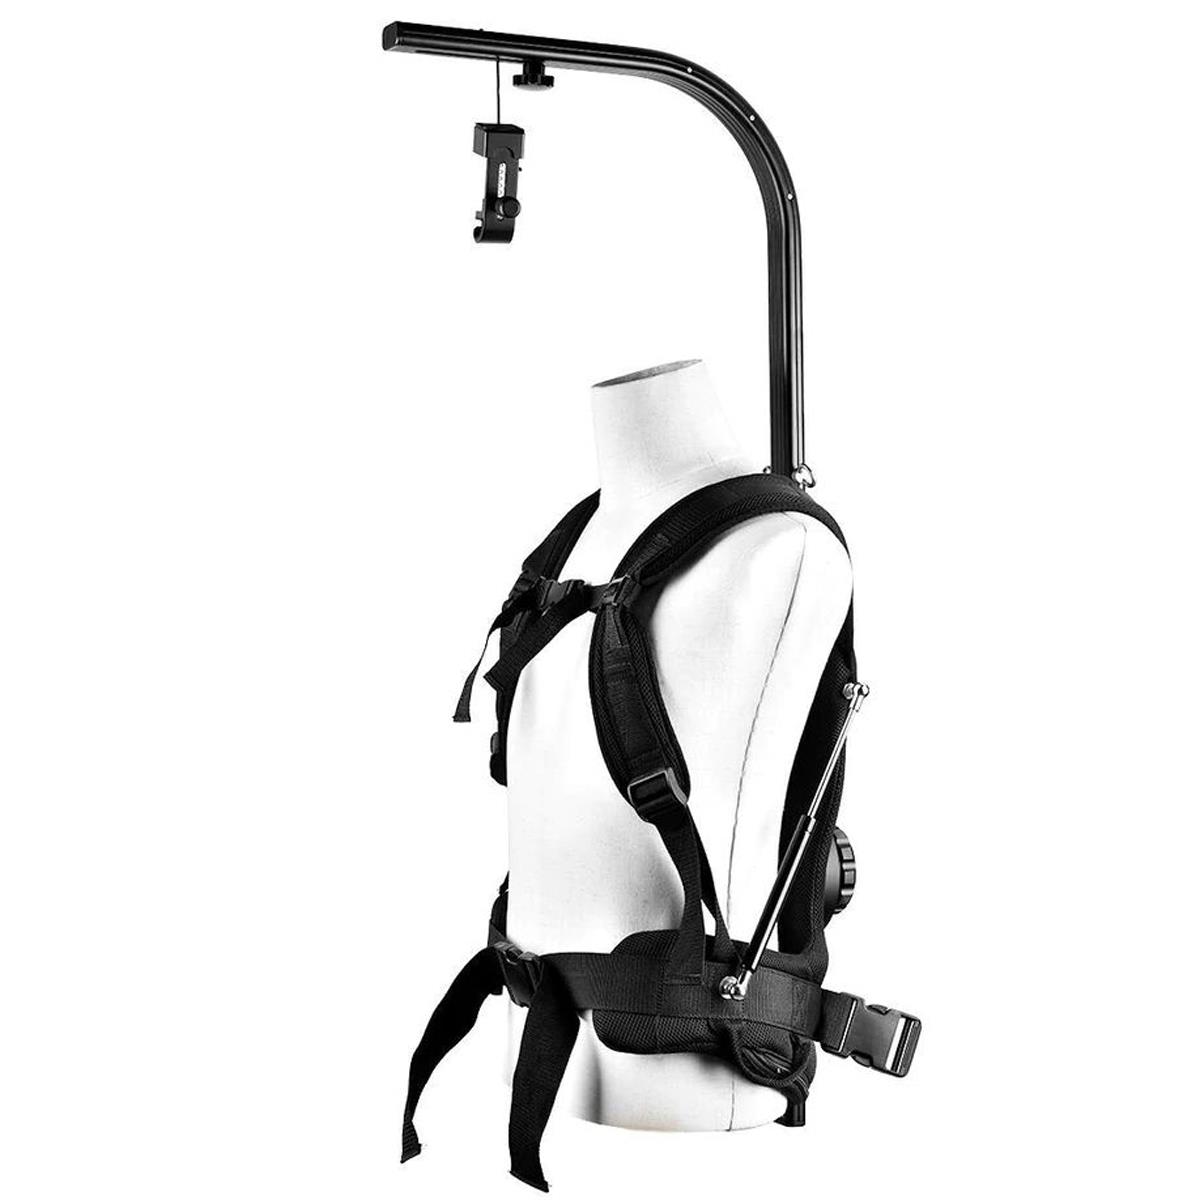 Image of Came-TV GS16 Gimbal Support Vest